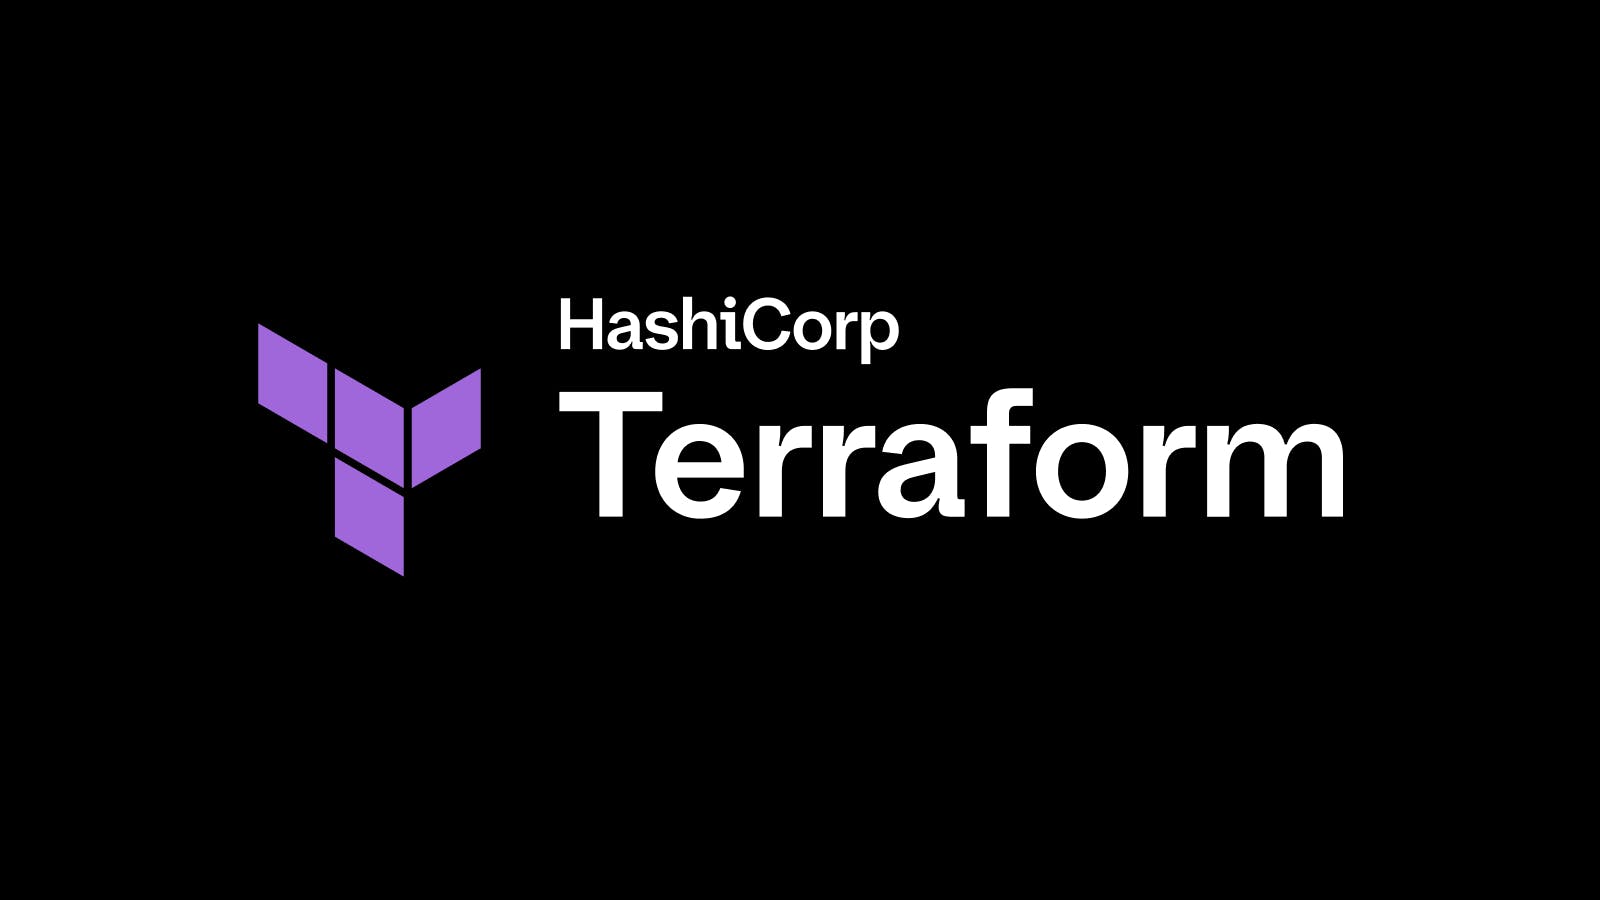 6 ways Terraform can help secure your infrastructure